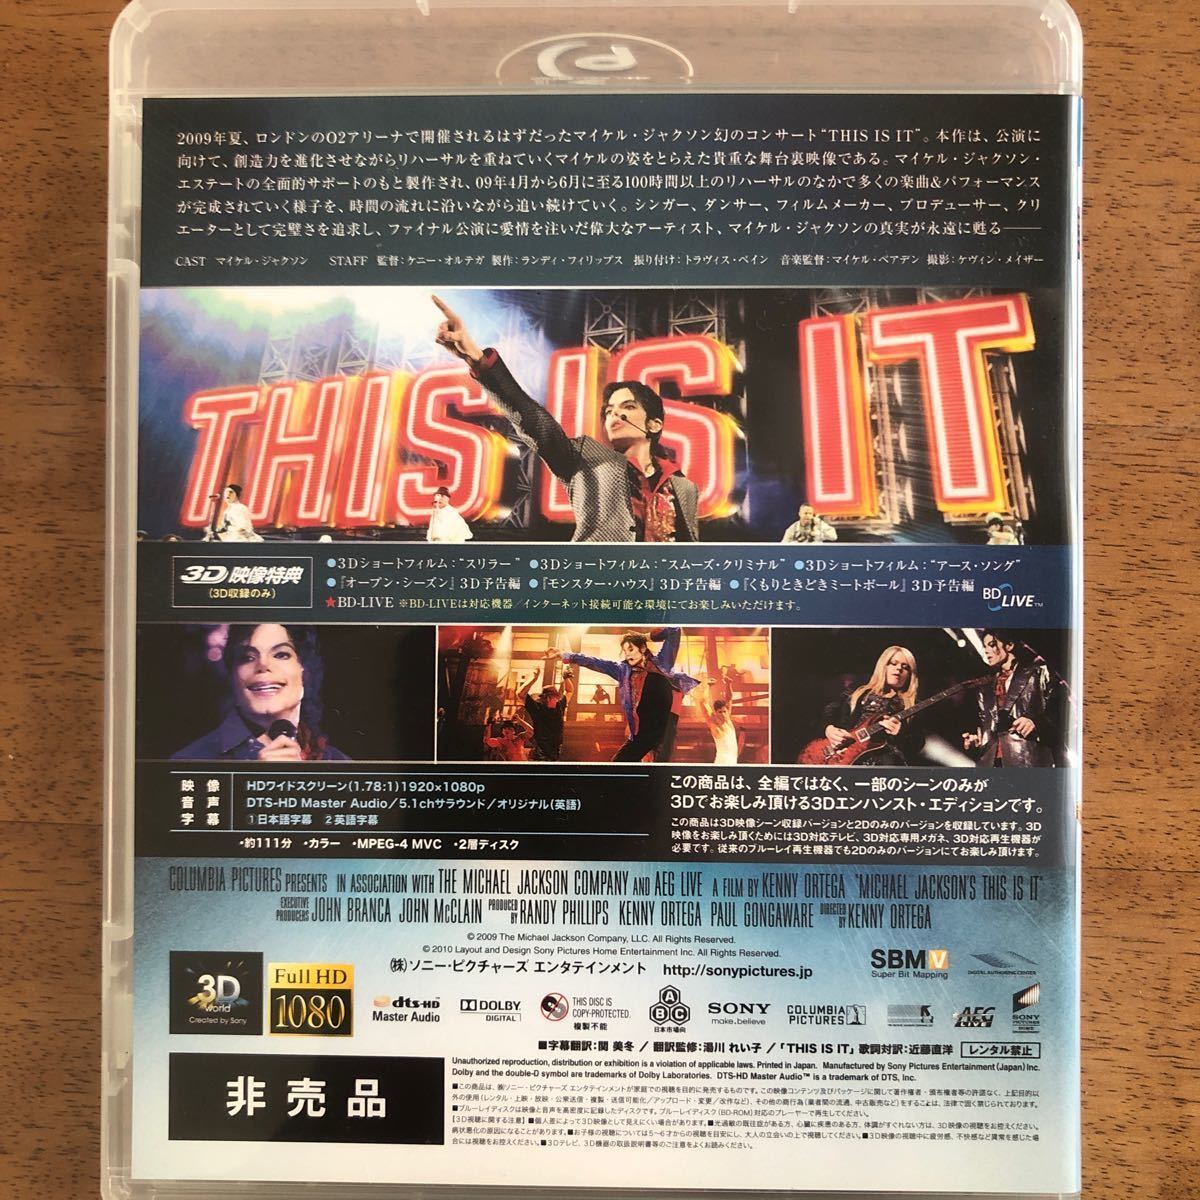 【Blu-ray 3D Enhanced Edition】◆Michael Jackson's THIS IS IT◆国内盤 非売品 送料4点まで185円_画像2